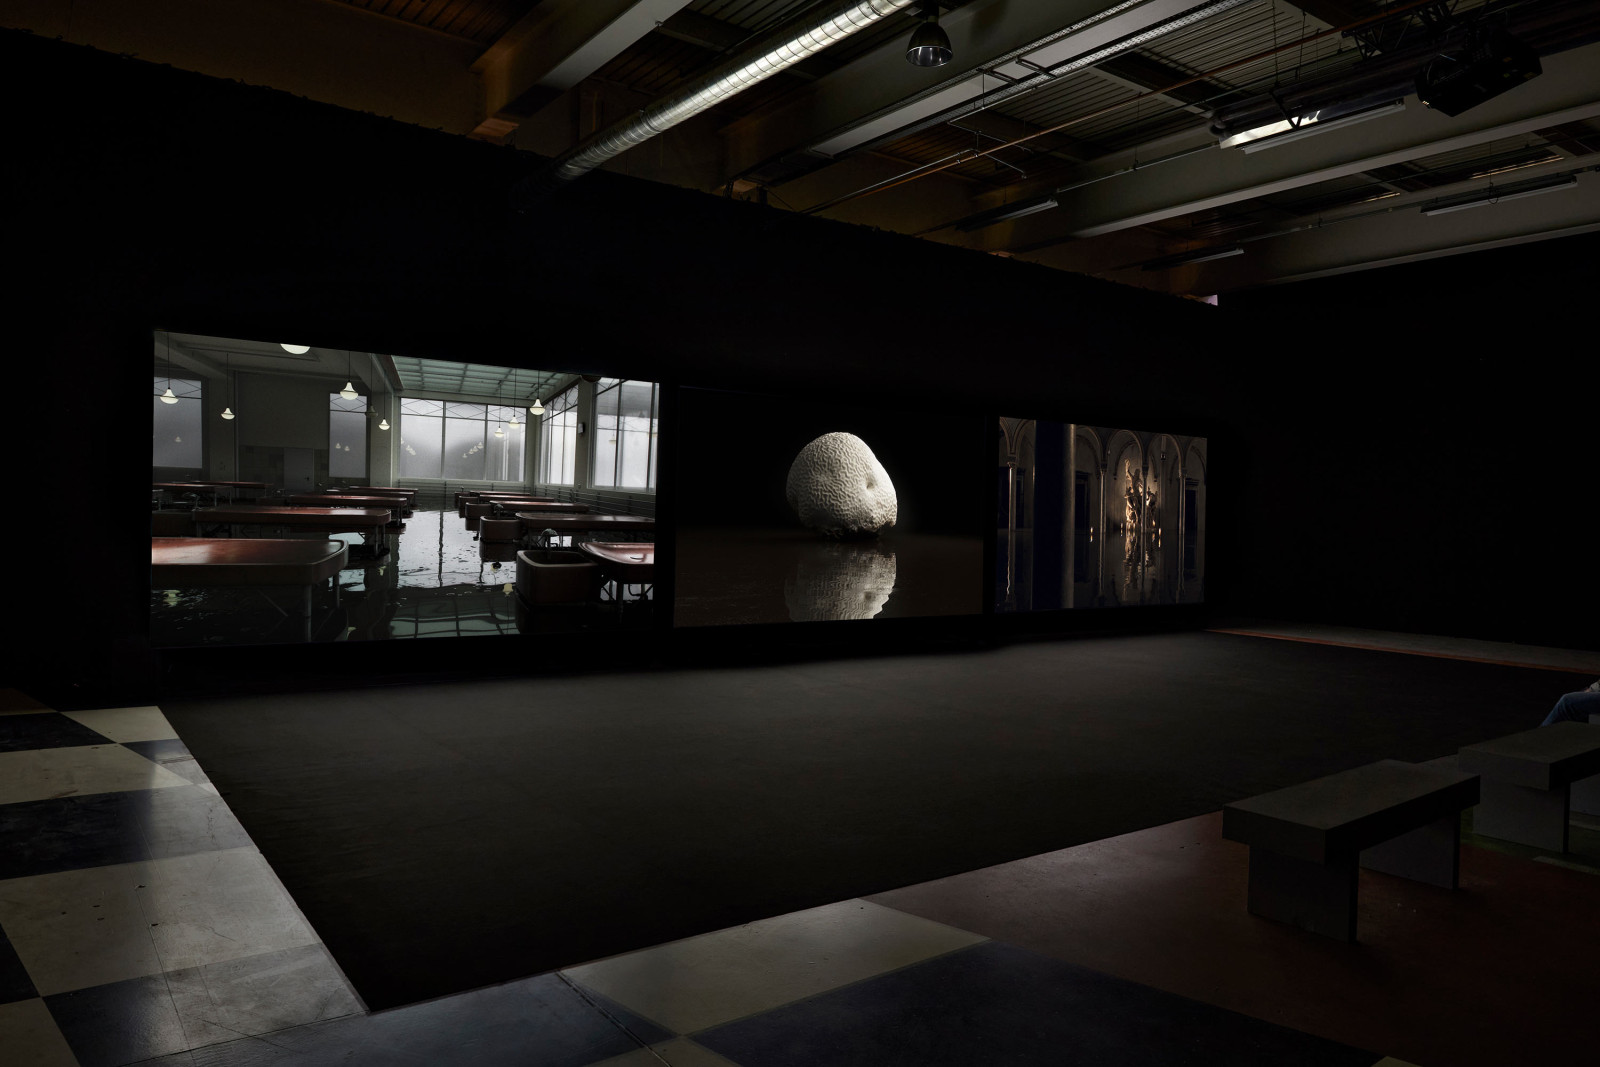 16th Lyon Biennale, manifesto of fragility, 2022, curated by Sam Bardaouil & Till Fellrath. Photo: François Deladerrière